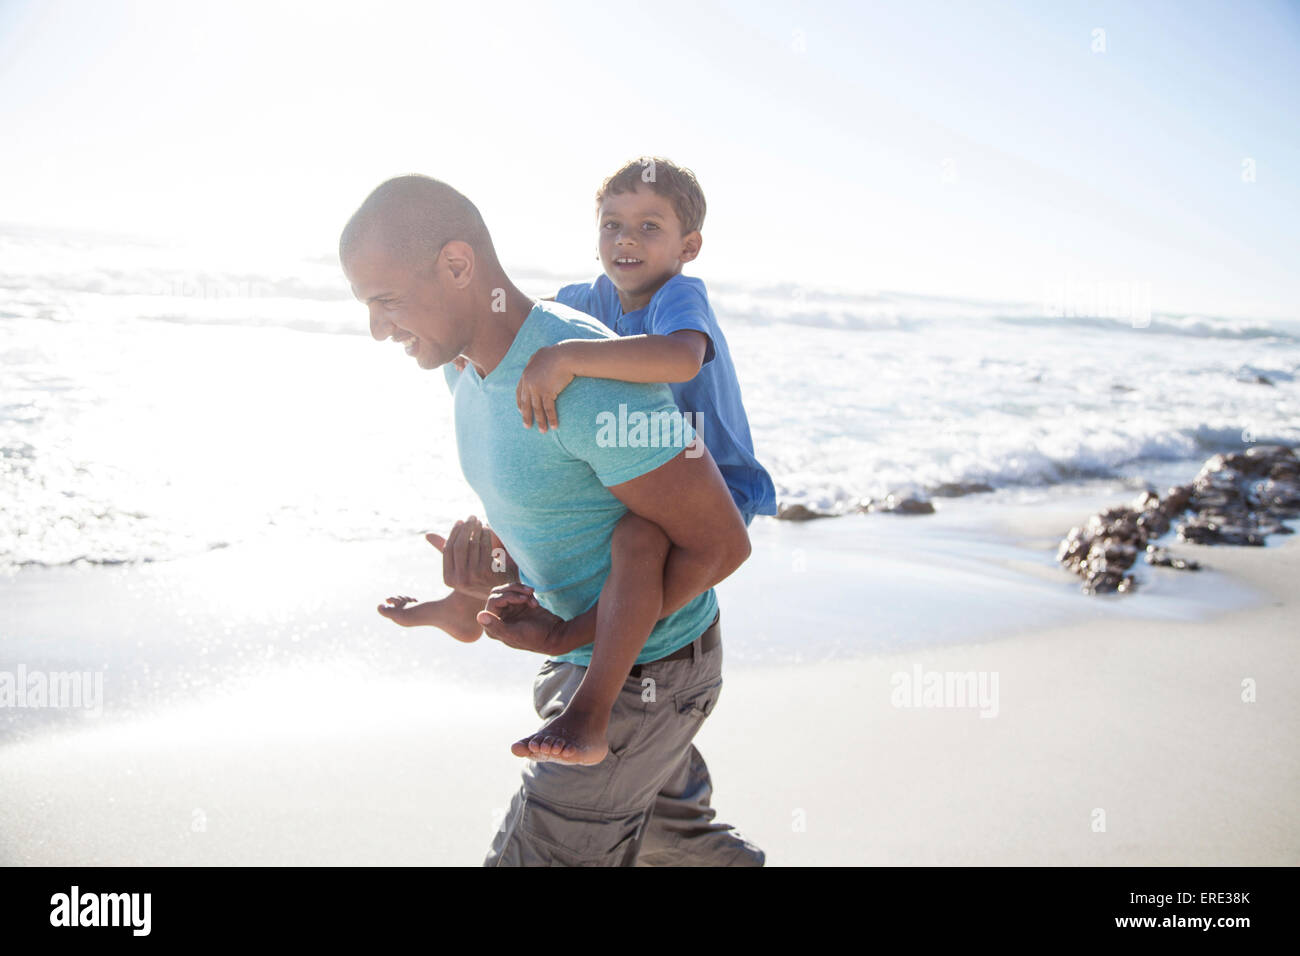 Mixed Race father carrying son piggyback on beach Banque D'Images